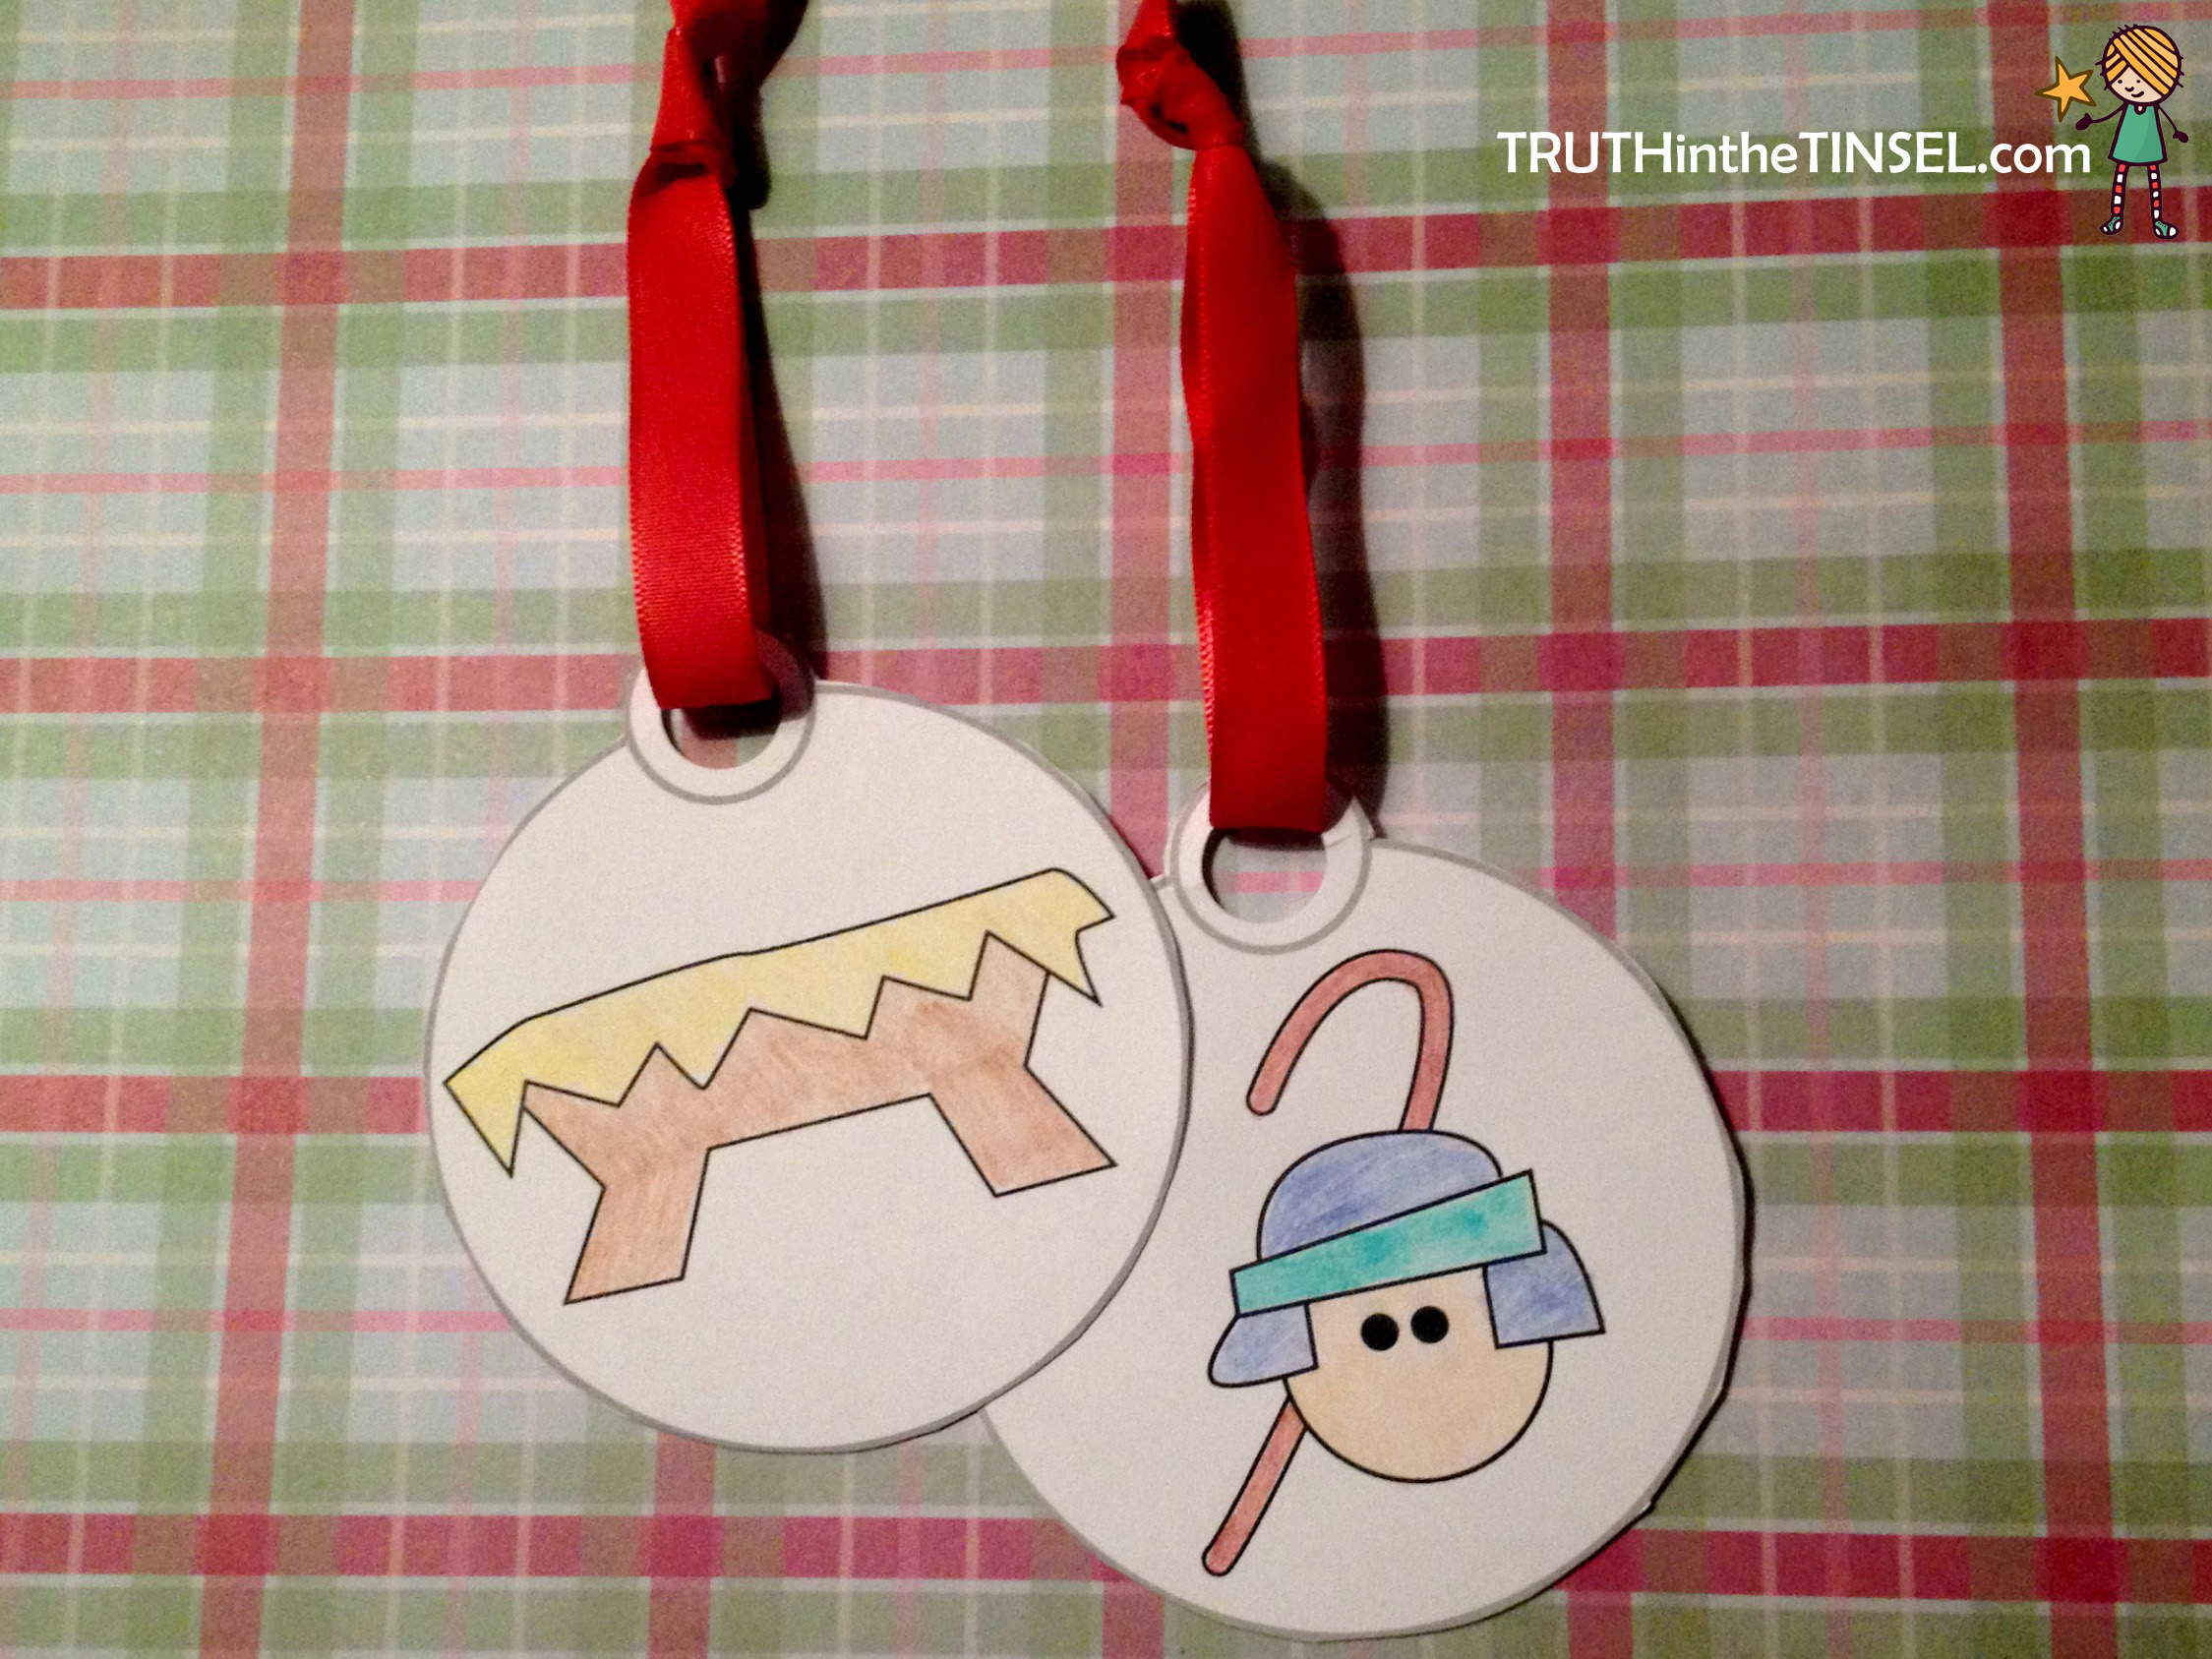 Printable Ornaments for Truth in the Tinsel